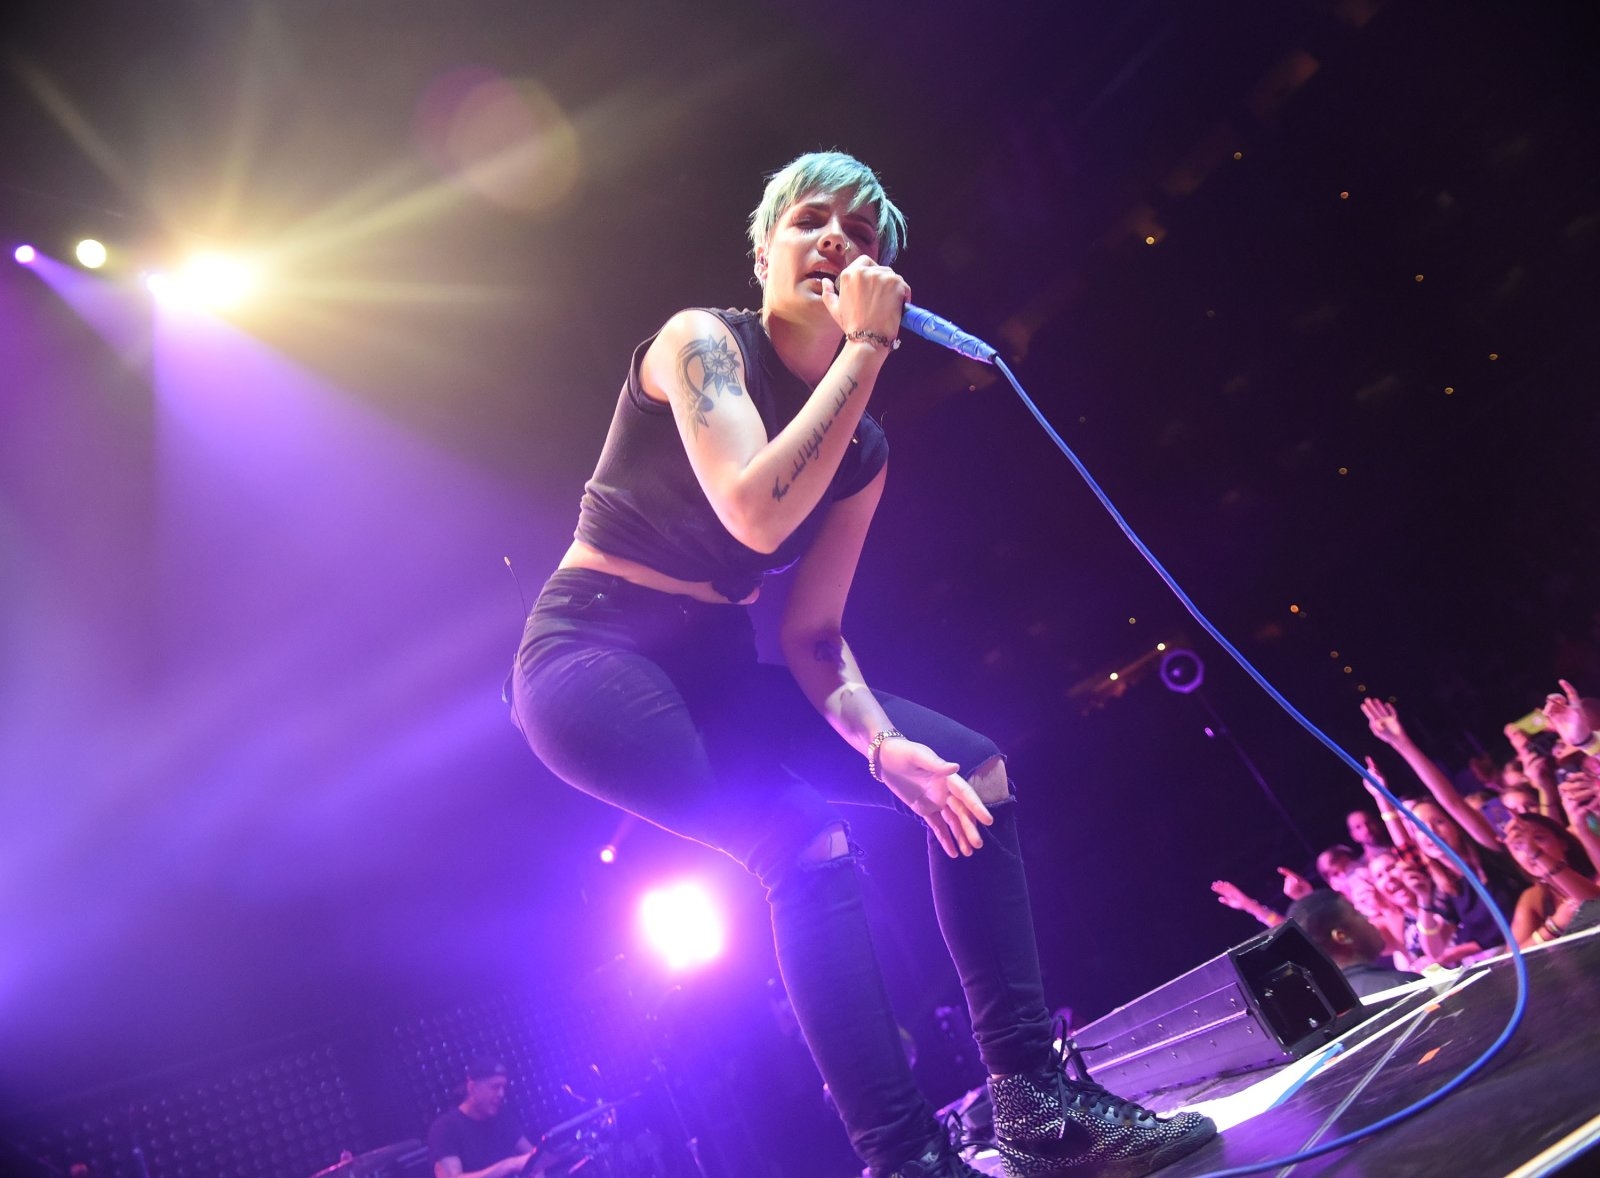 ATLANTA, GA - JULY 14:  Halsey performs at Philips Arena on July 14, 2015 in Atlanta, Georgia.  (Photo by Chris McKay/Getty Images)